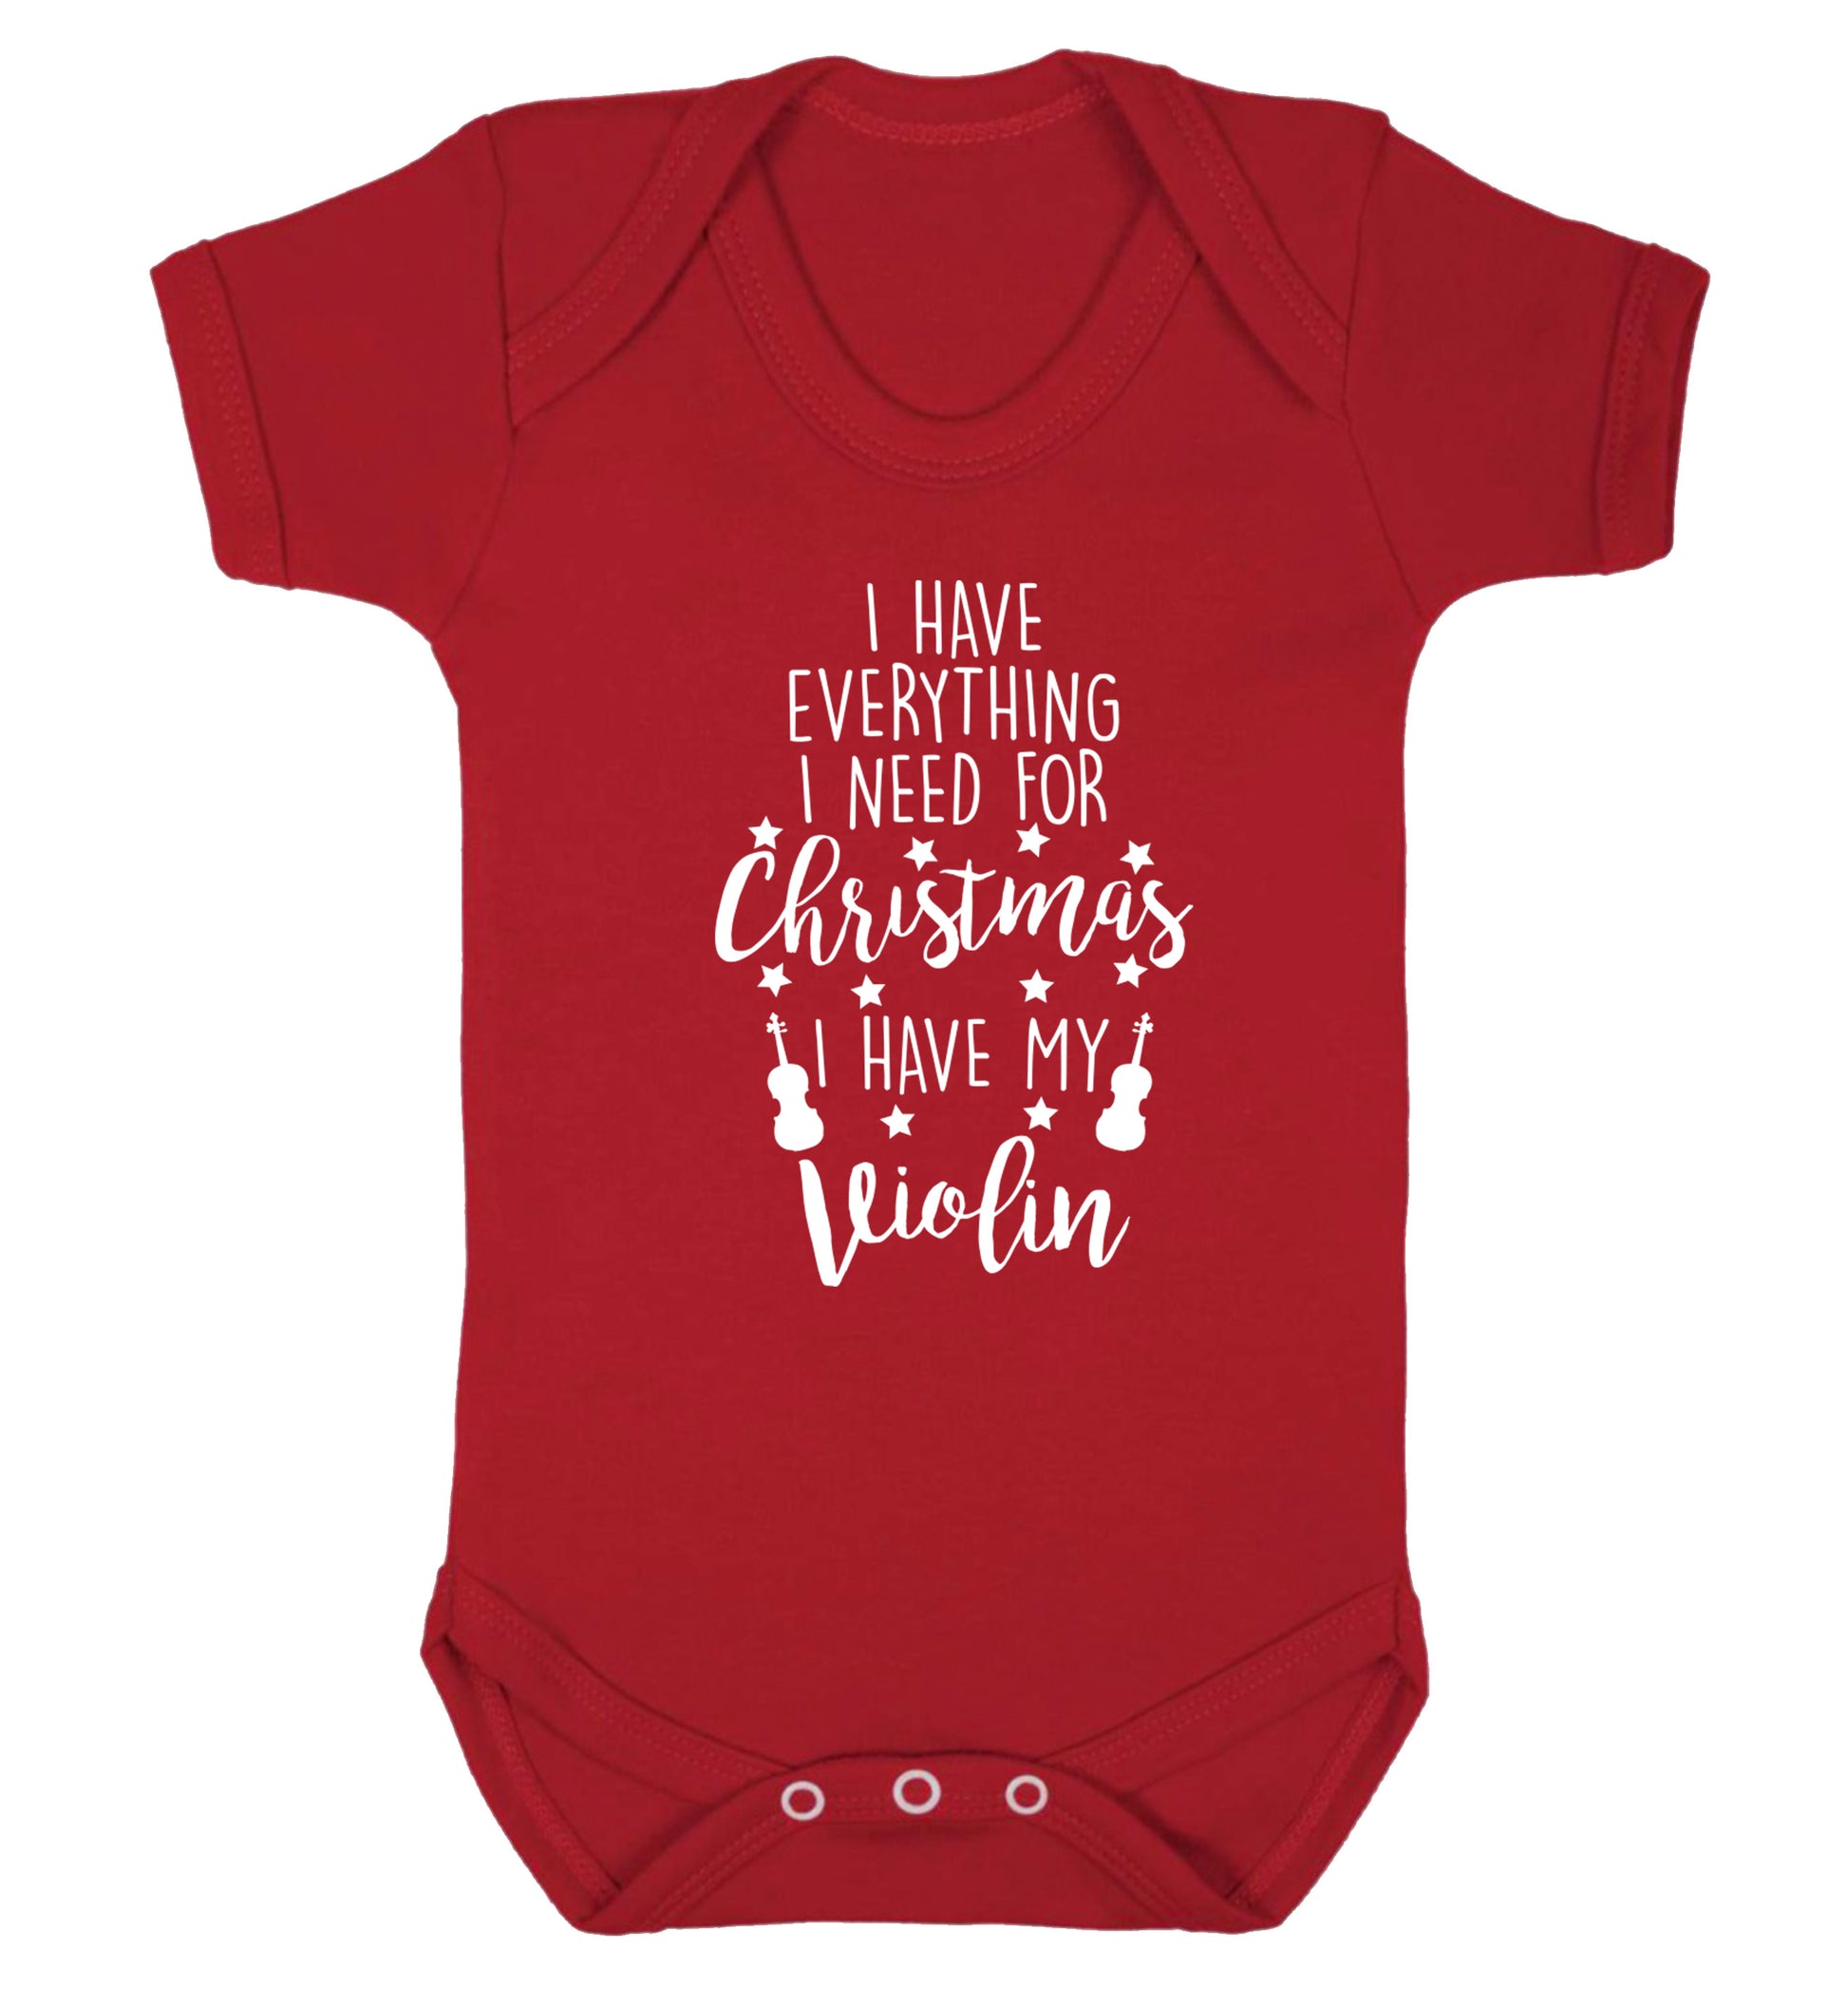 I have everything I need for Christmas I have my violin Baby Vest red 18-24 months